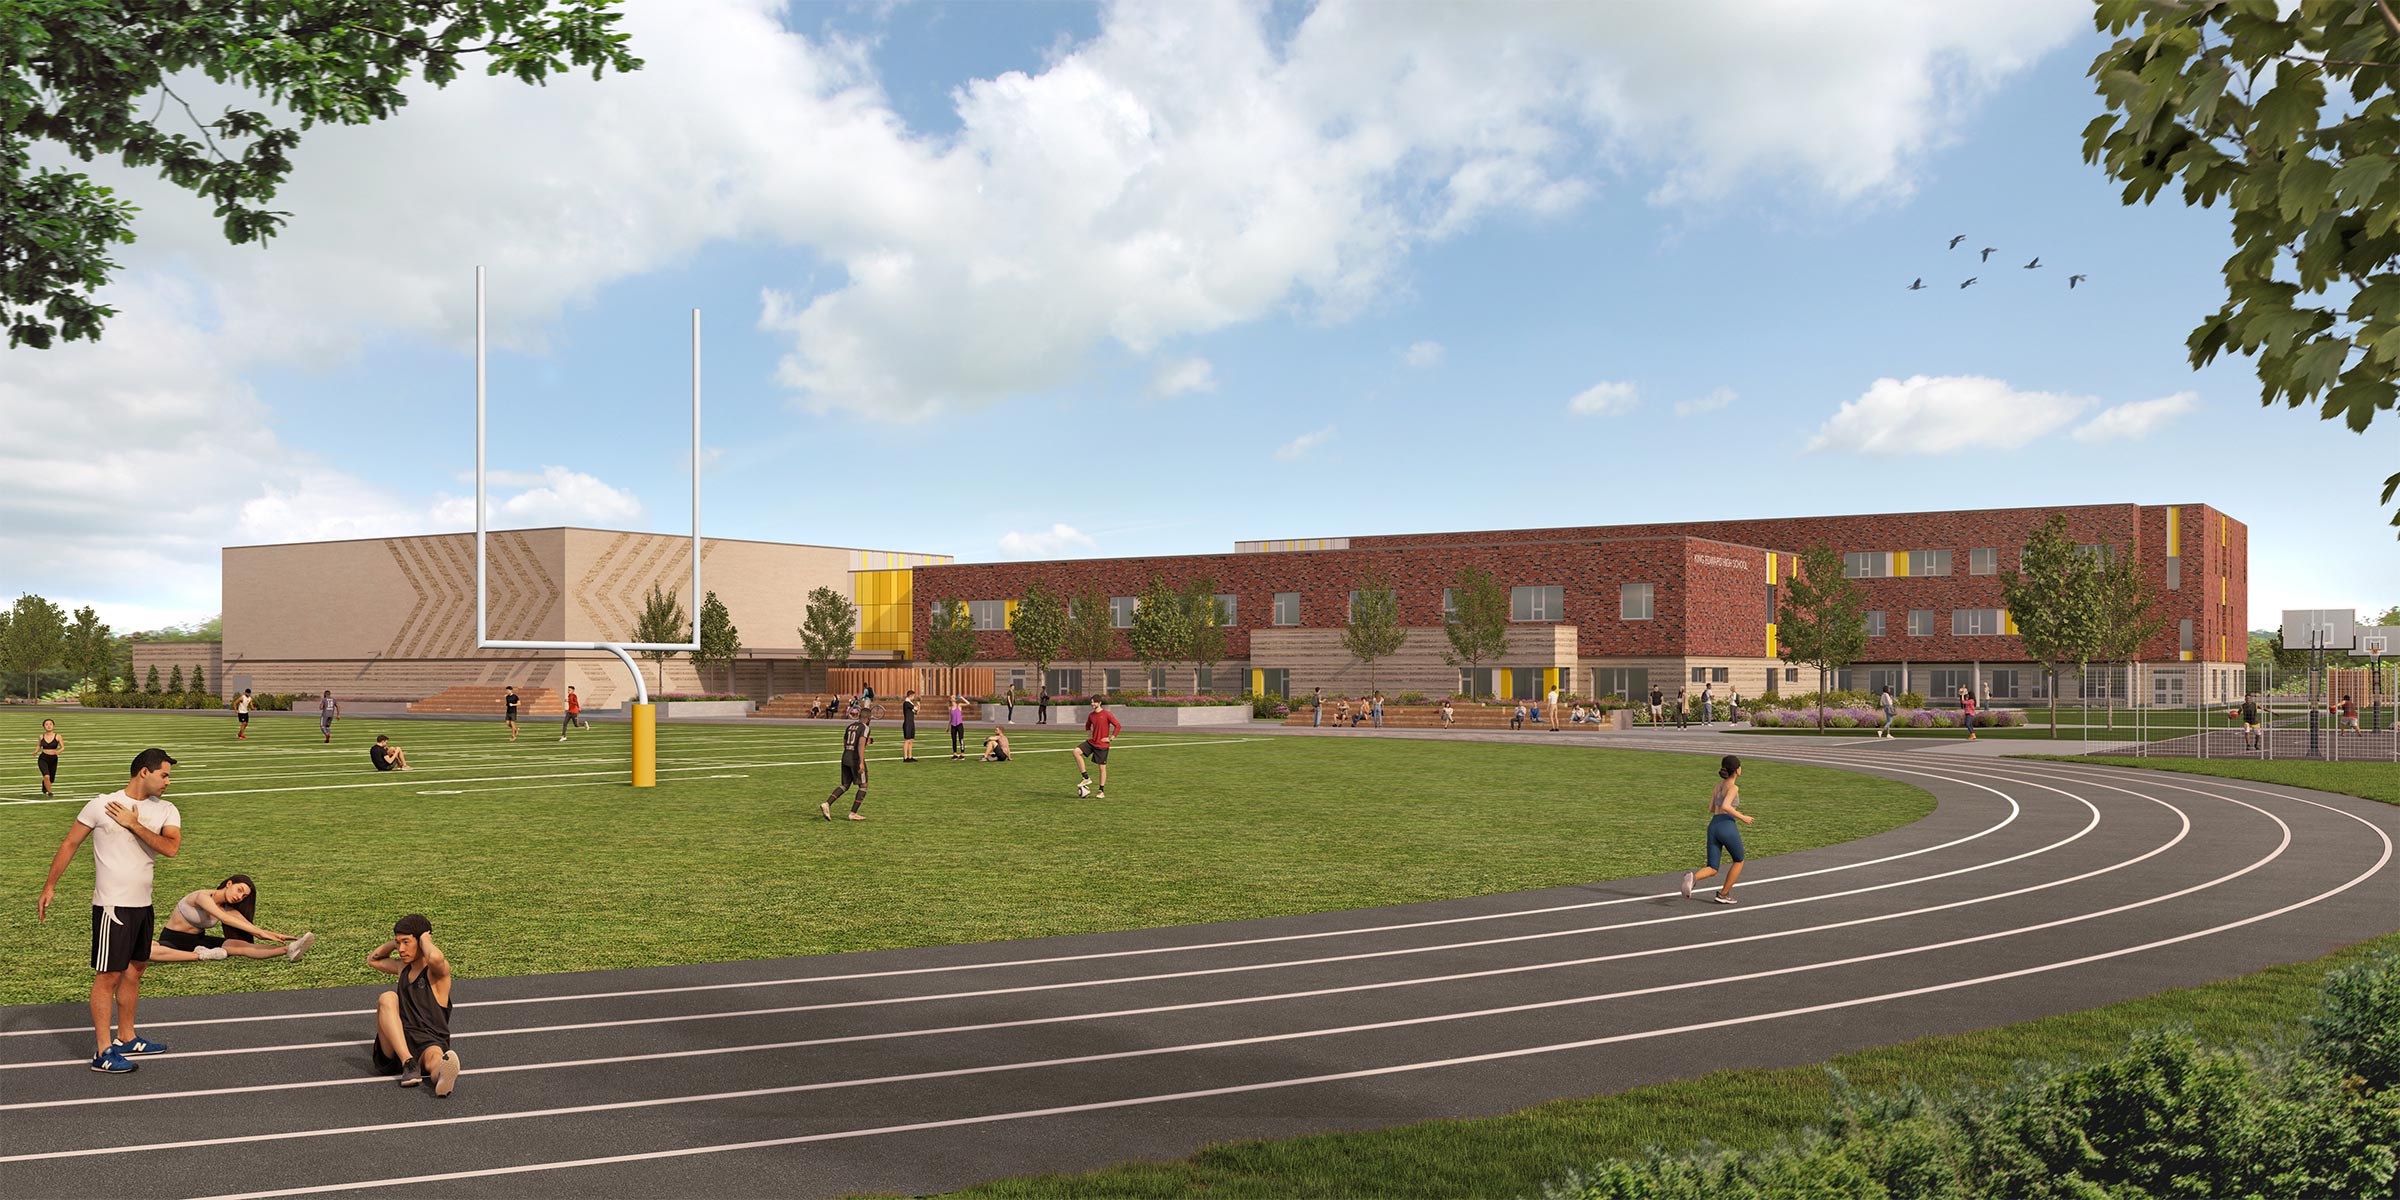 Exterior view of the running track and outdoor spaces.